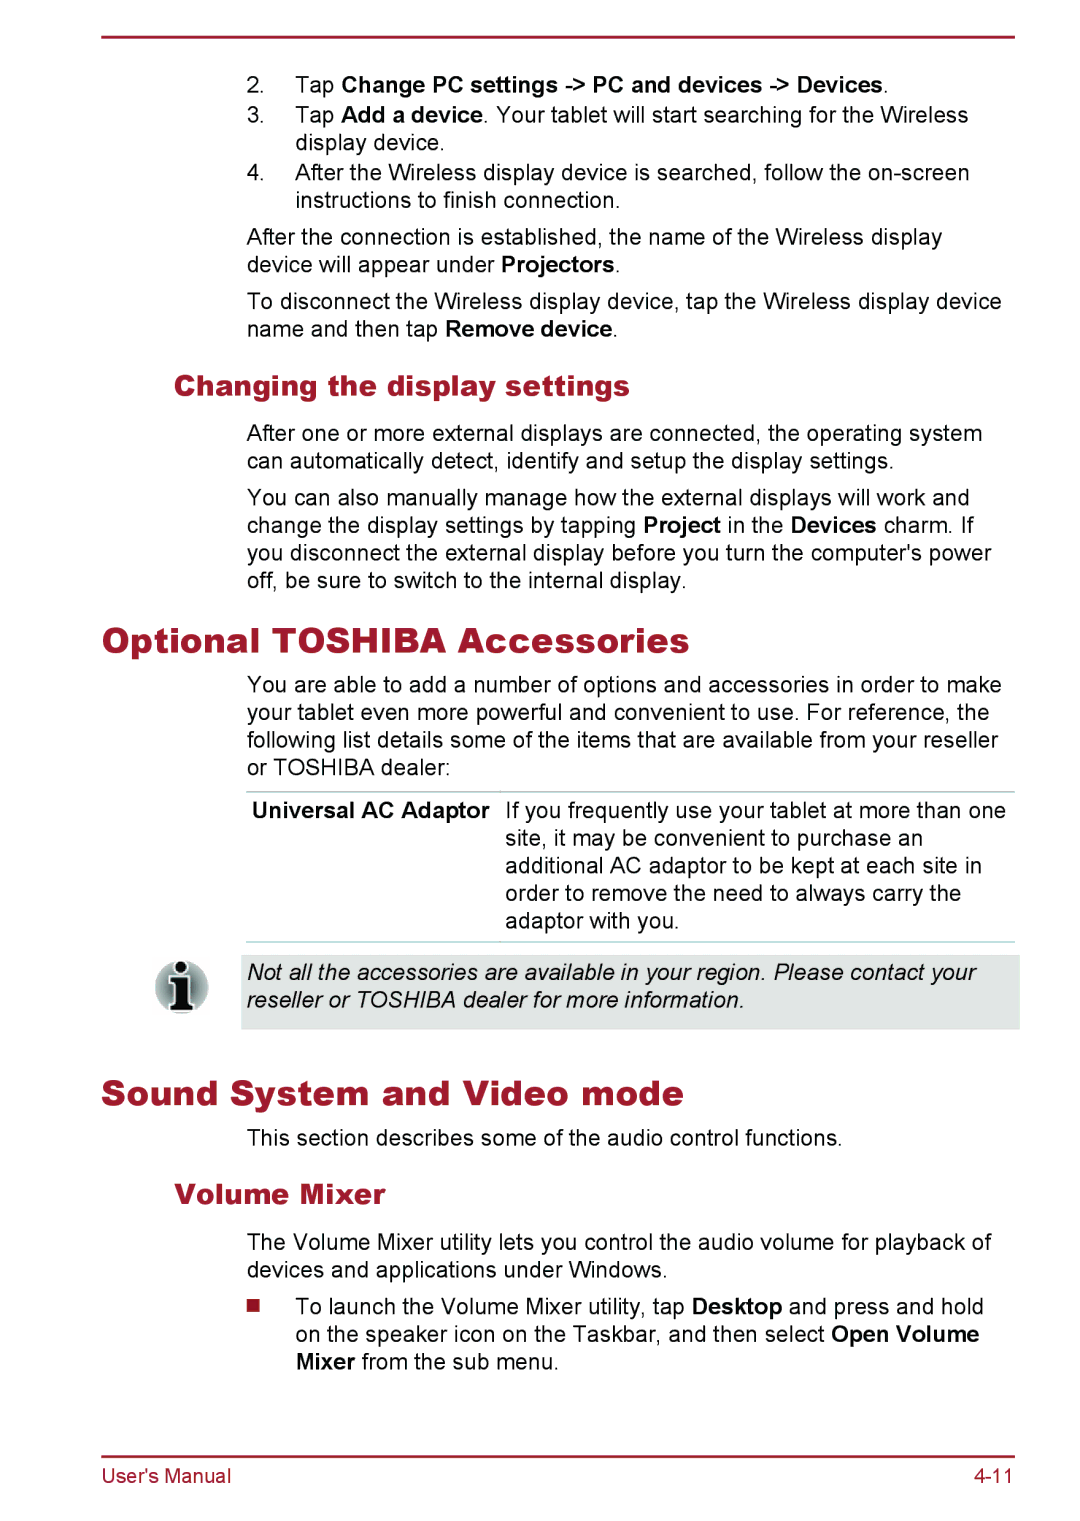 Toshiba WT8-A Series user manual Optional Toshiba Accessories, Sound System and Video mode, Changing the display settings 